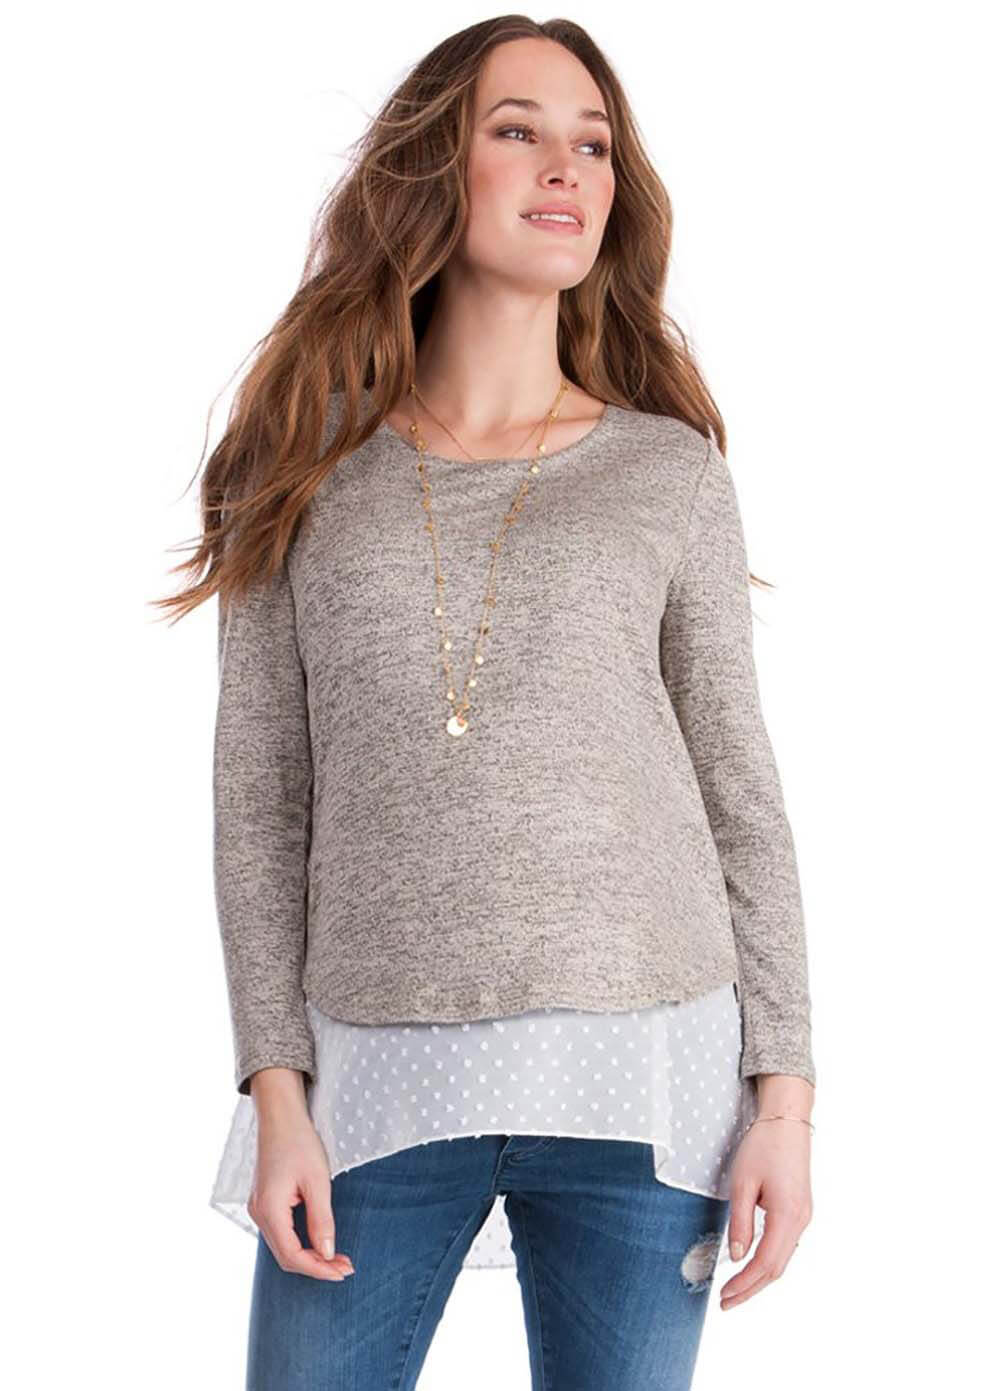 Anthea Layered Maternity Nursing Top by Seraphine